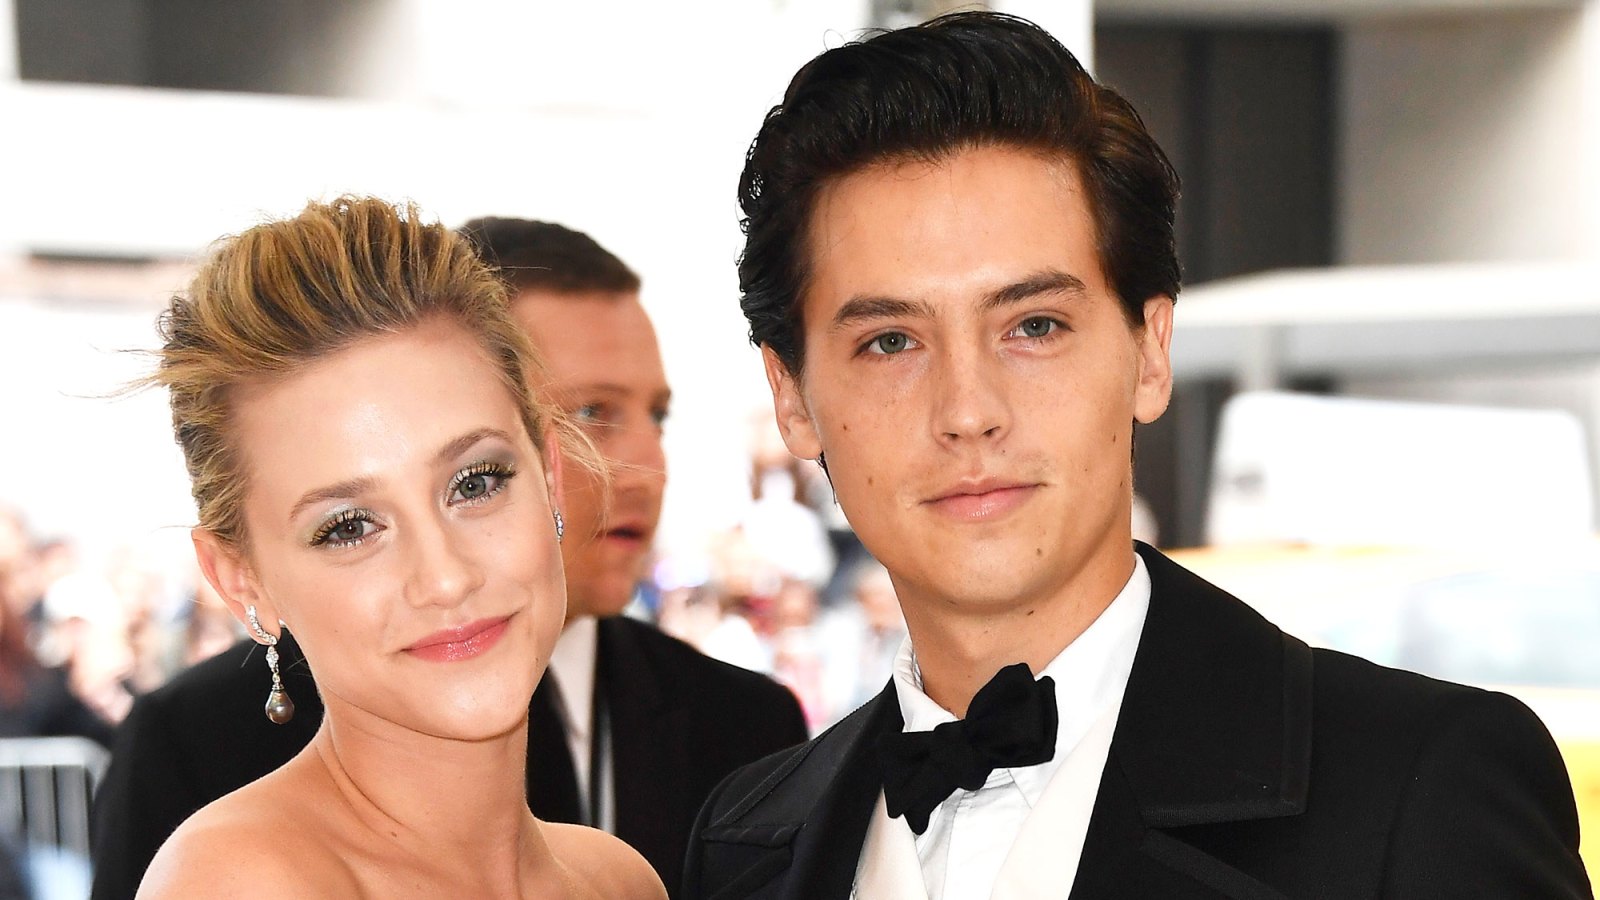 Lili Reinhart chimed in about Cole Sprouse having these five attributes